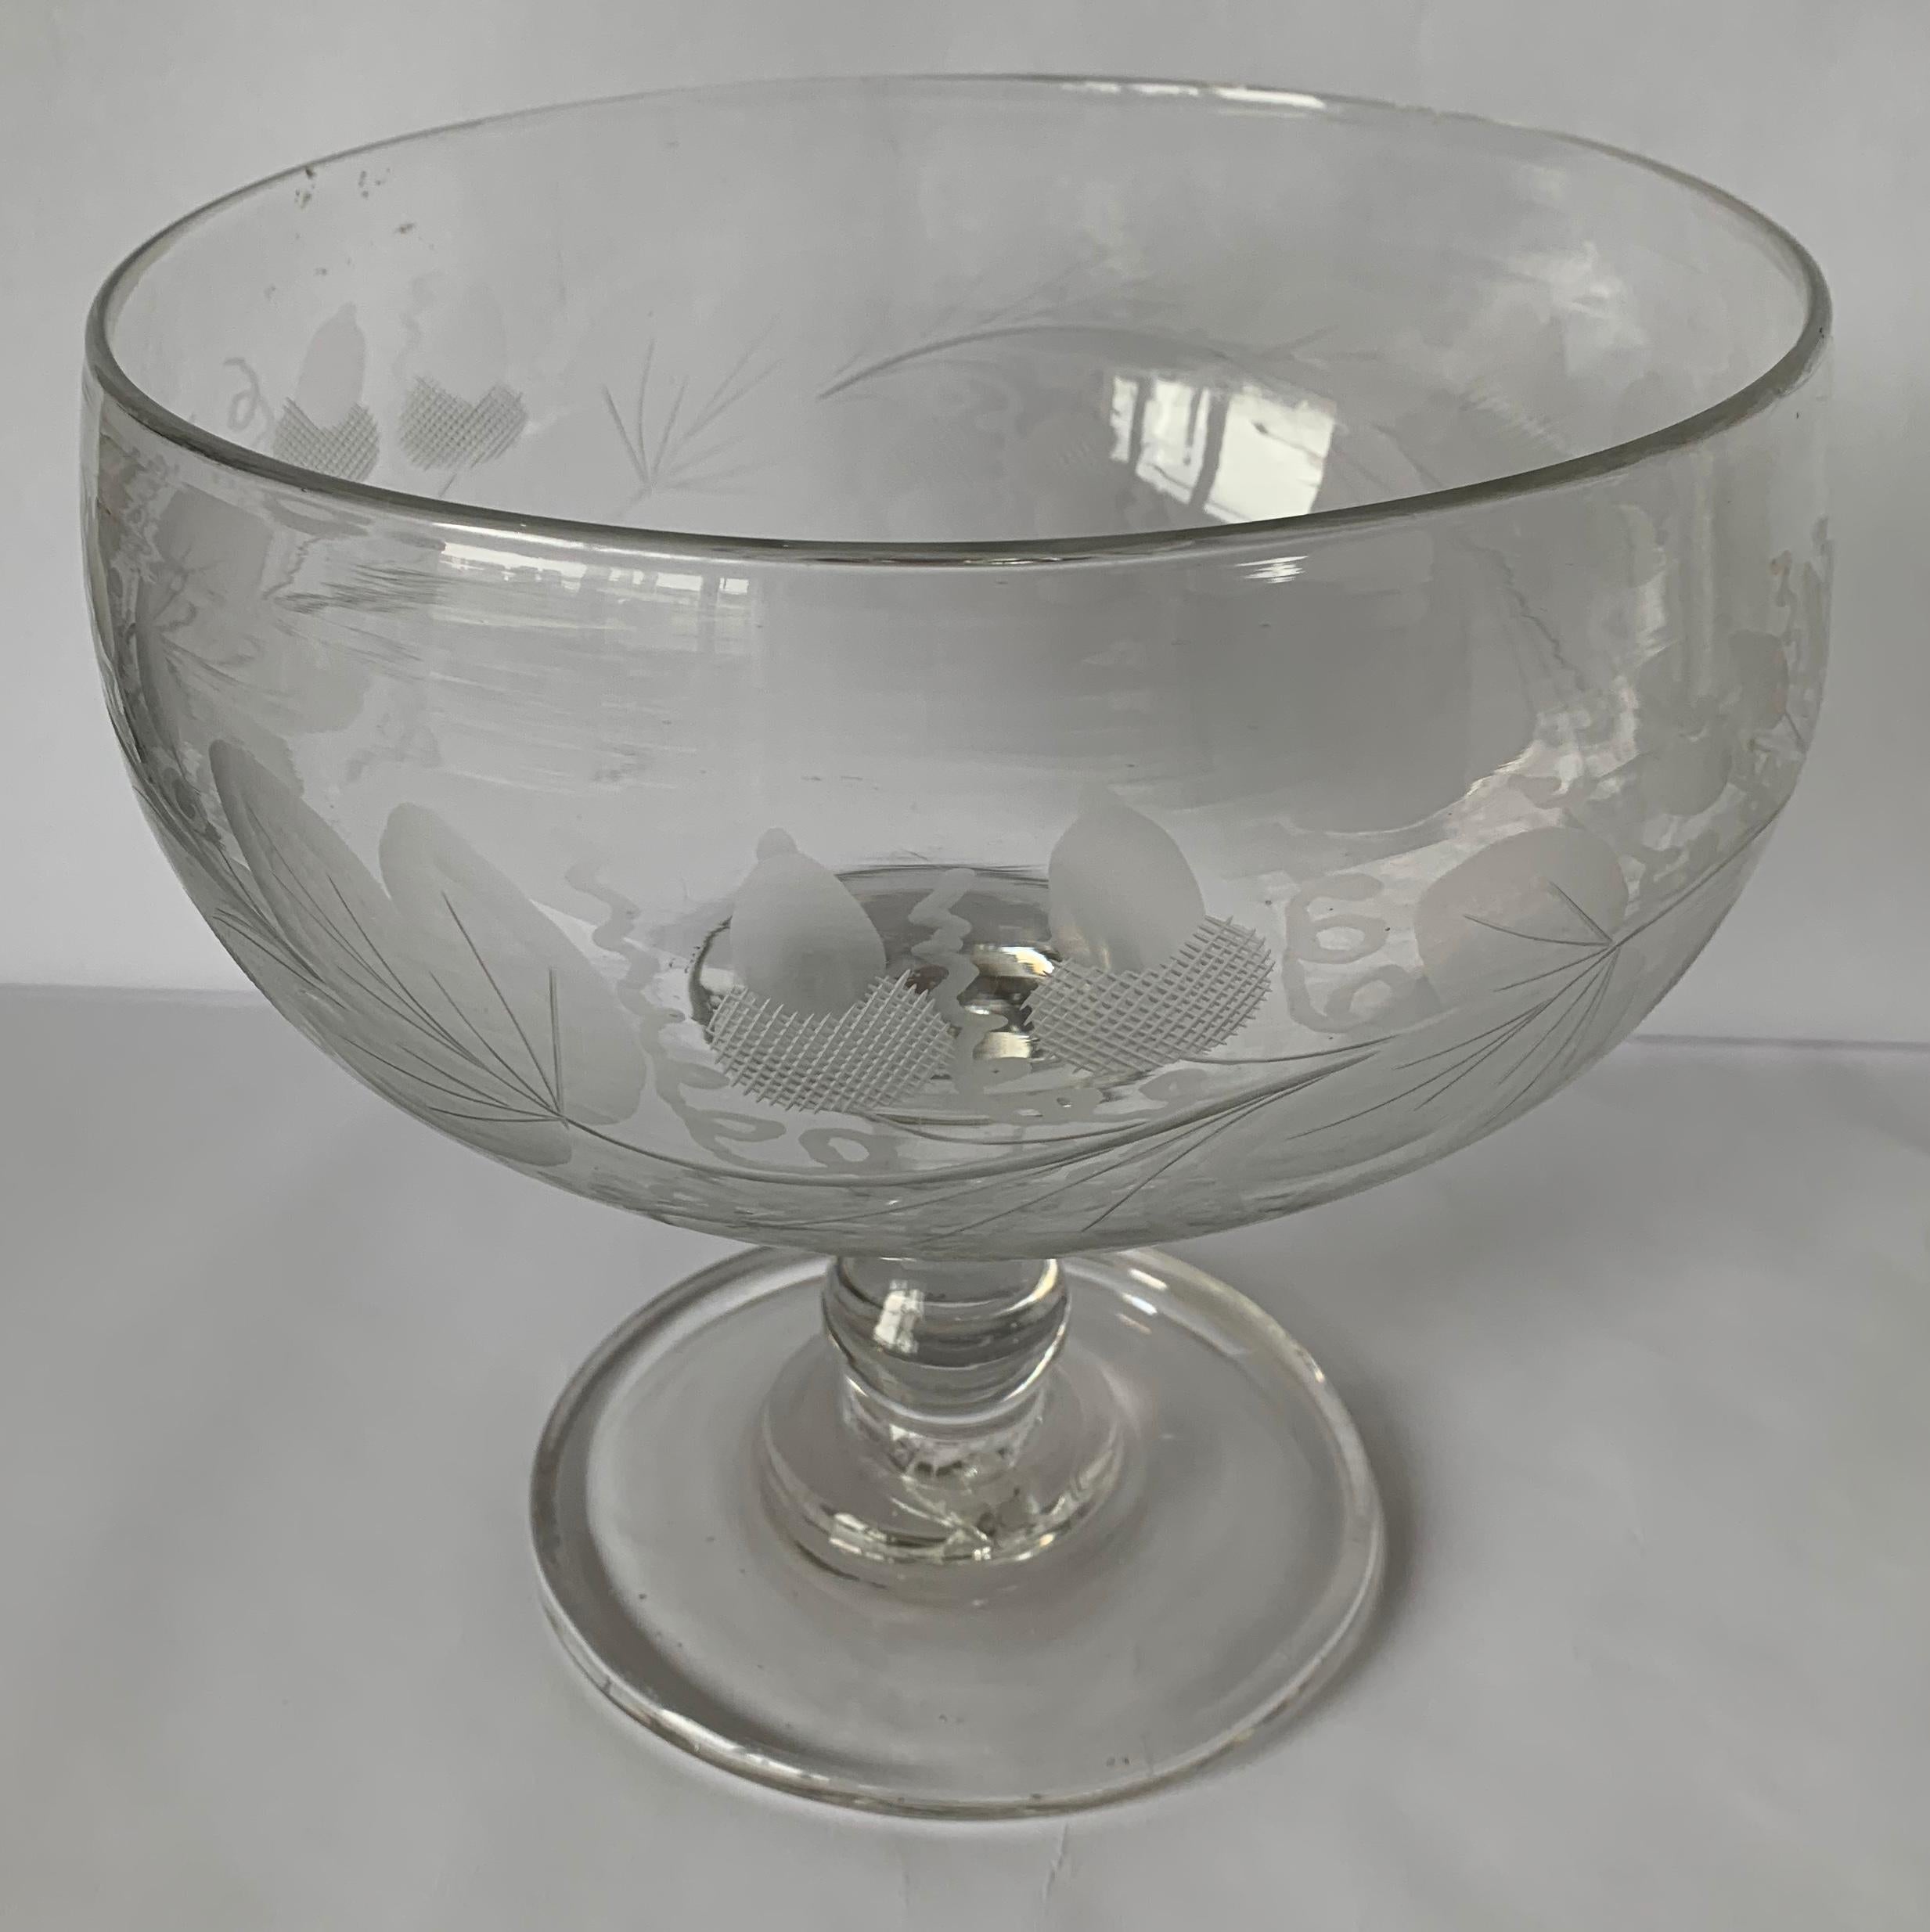 1840s antique American glass footed compote or bowl. Free form blown clear glass. All-over engraved acorn and oak leaf motif. No makers mark.